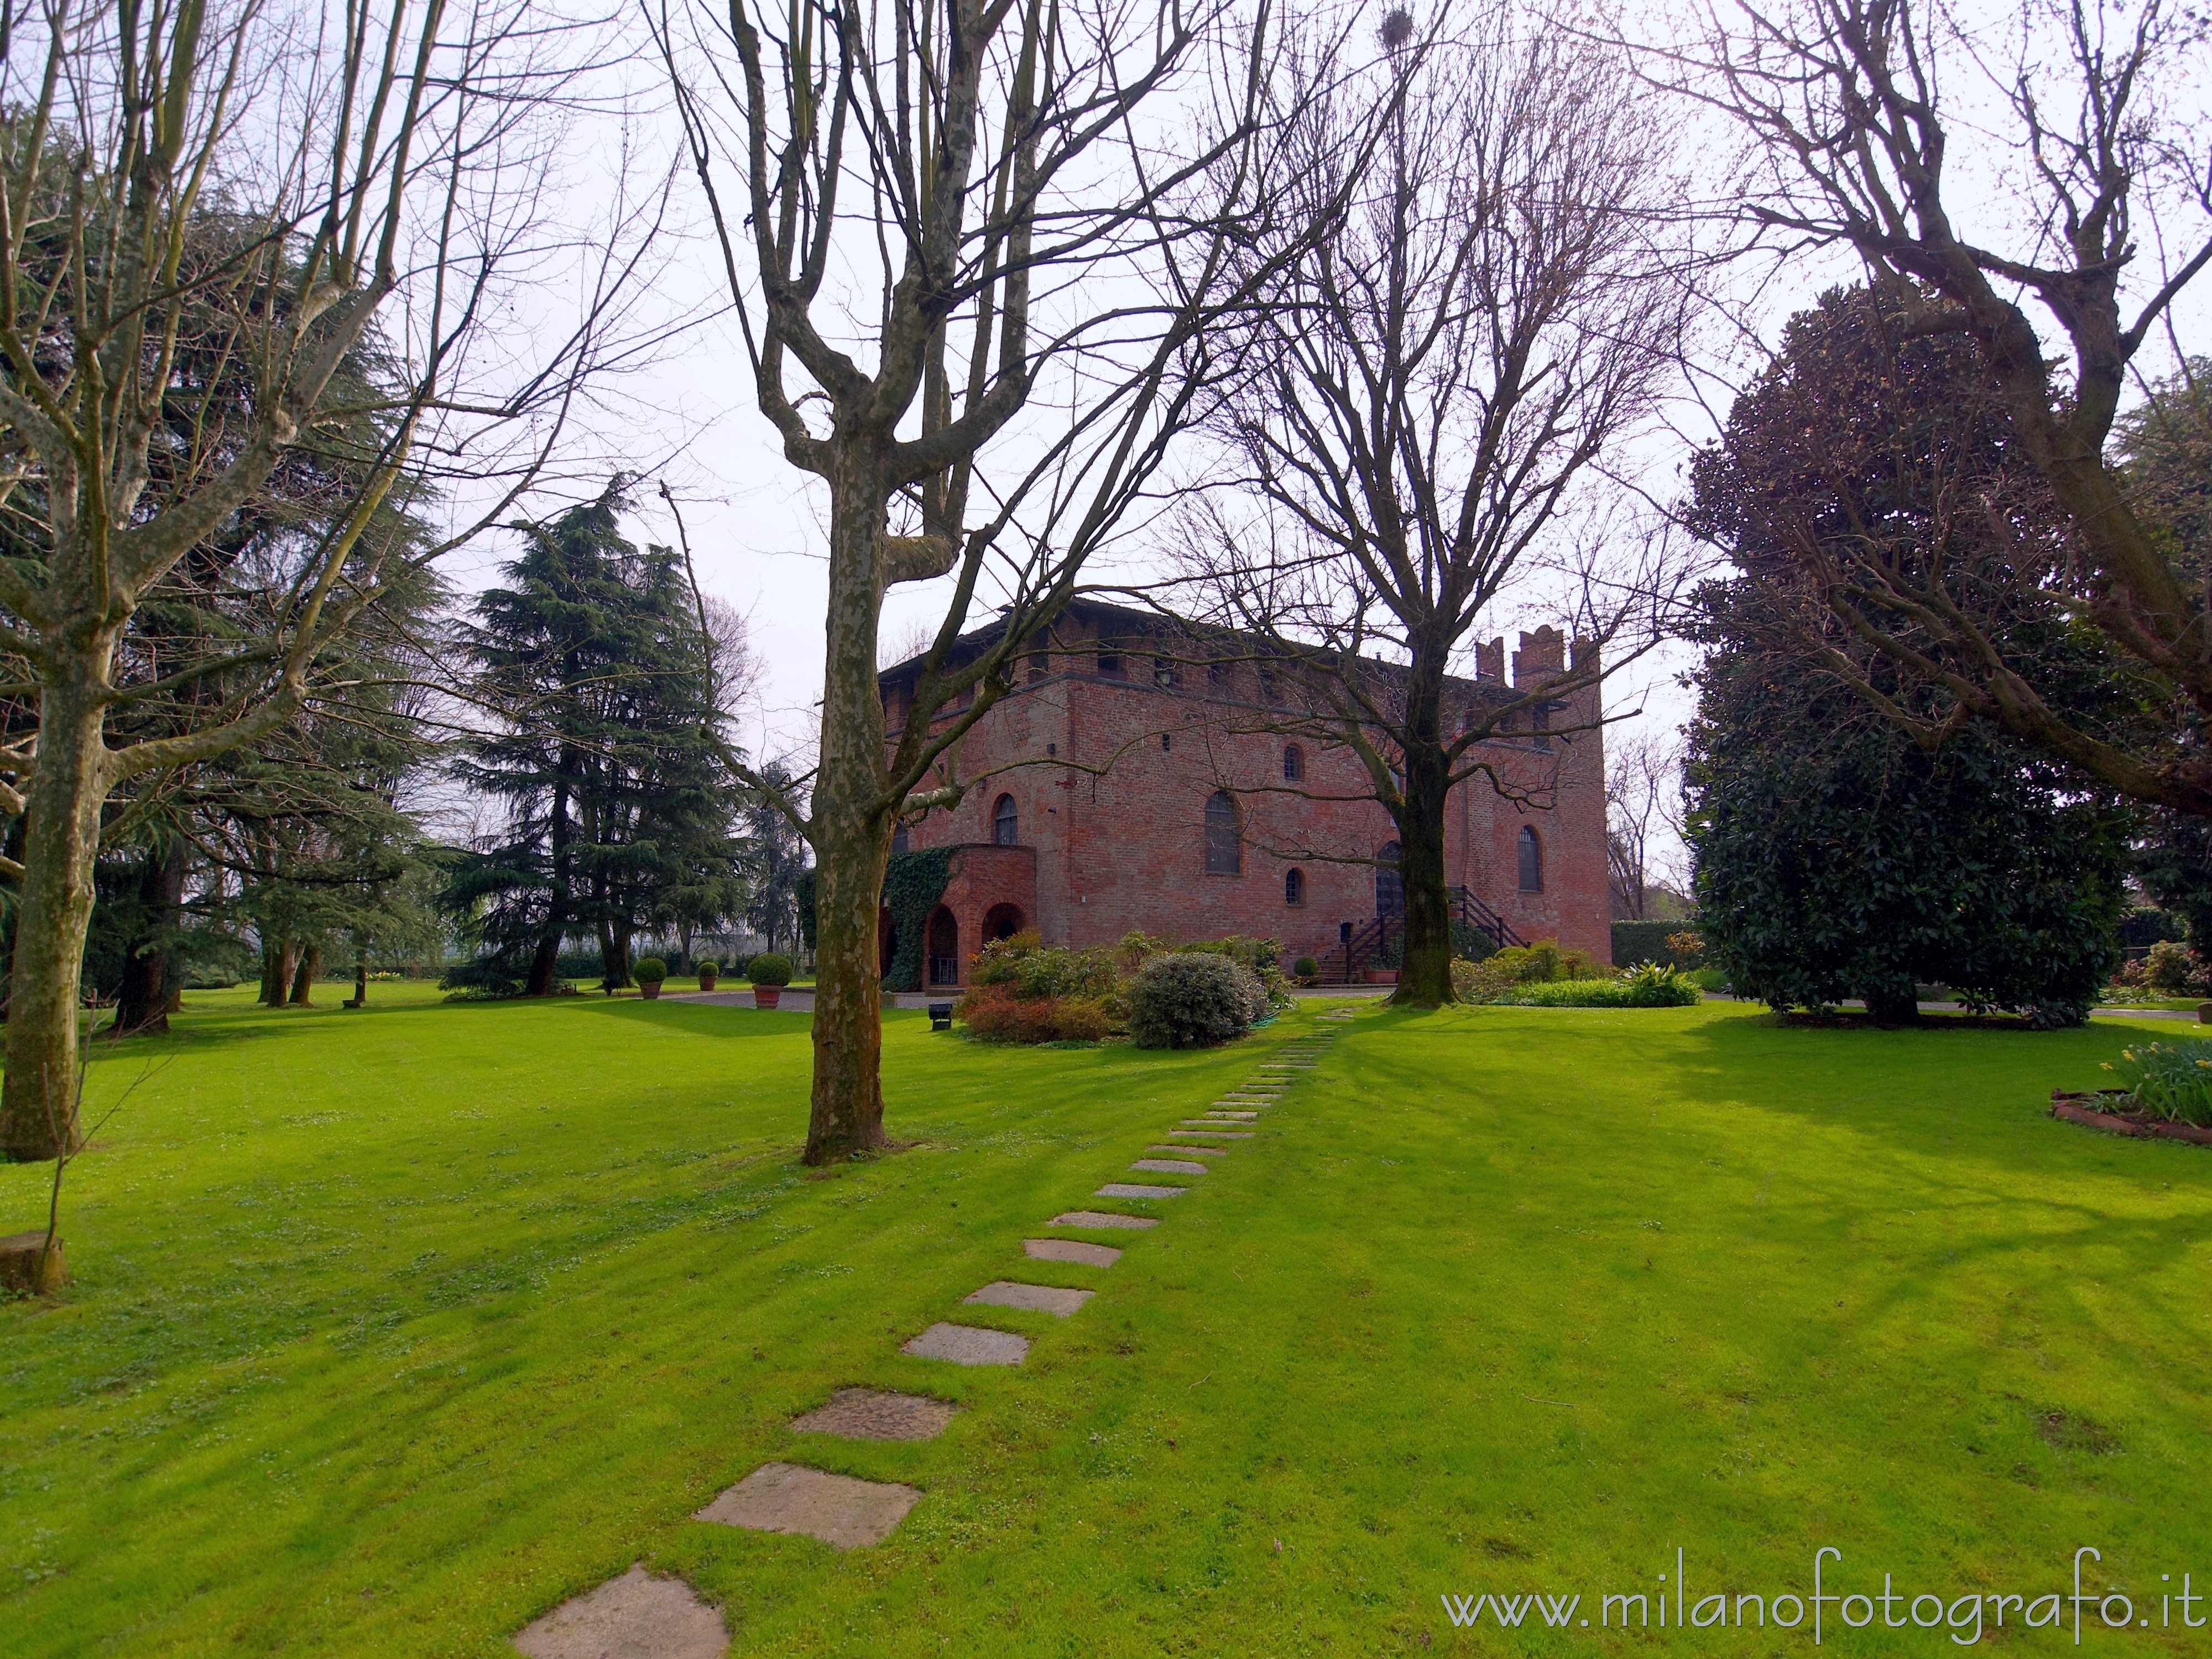 Milan (Italy): Castle of Macconago, the second castle of Milan, and its park - Milan (Italy)